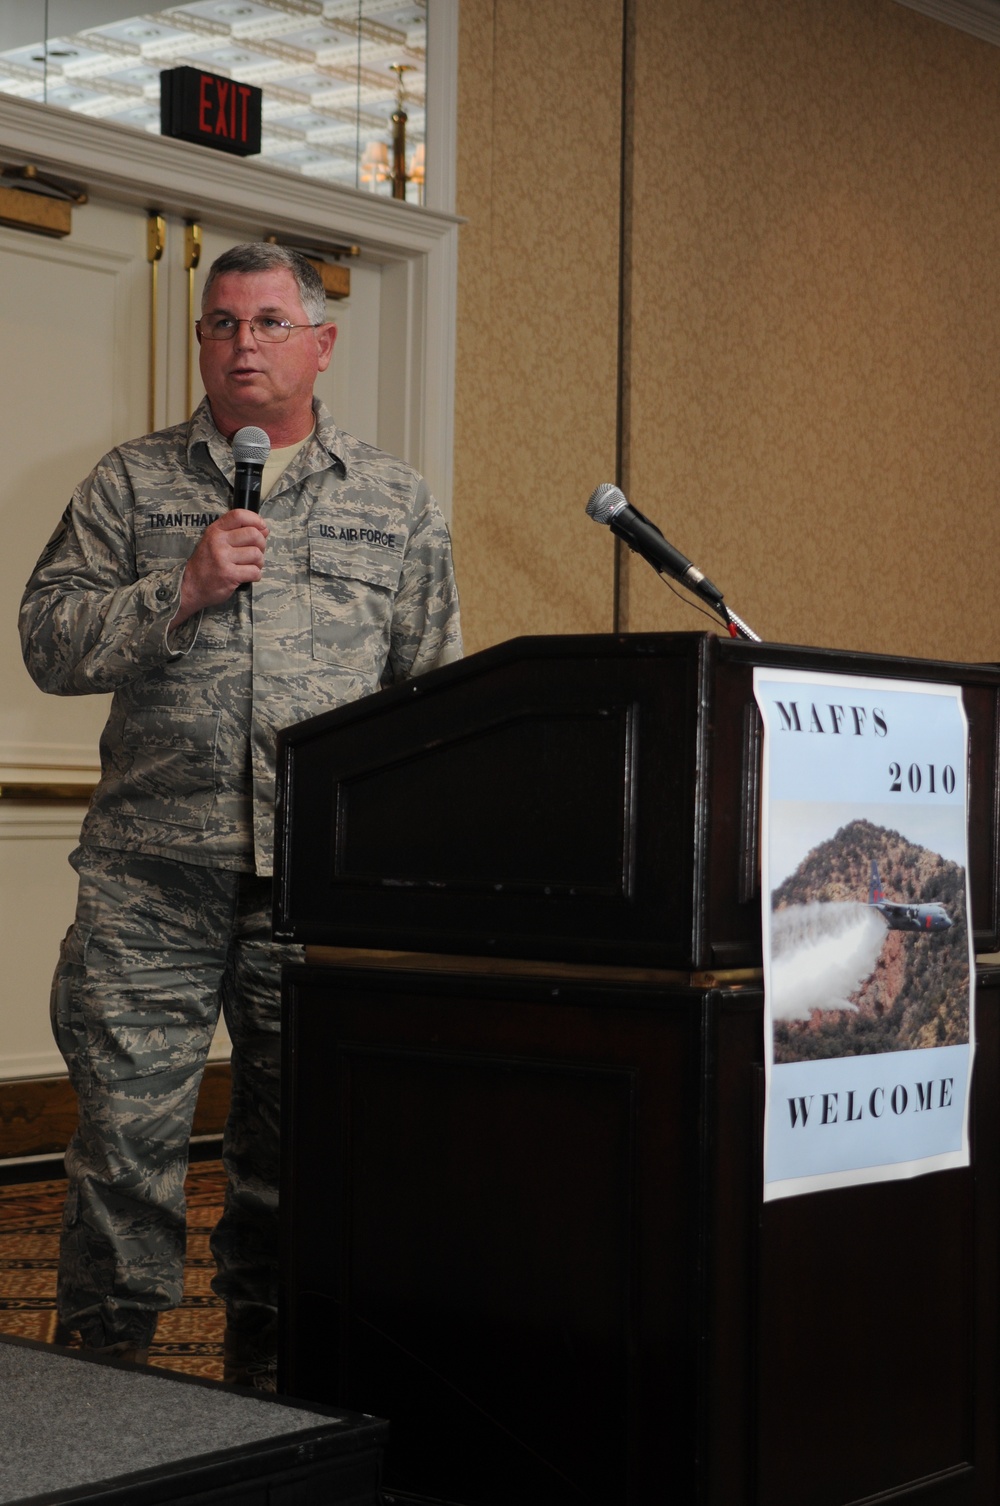 Chief Master Sgt. Greg Trantham Overviews Ramp and Maintenance Issues to the Audience During the MAFFS Welcome Briefing in Greenville, S.C.